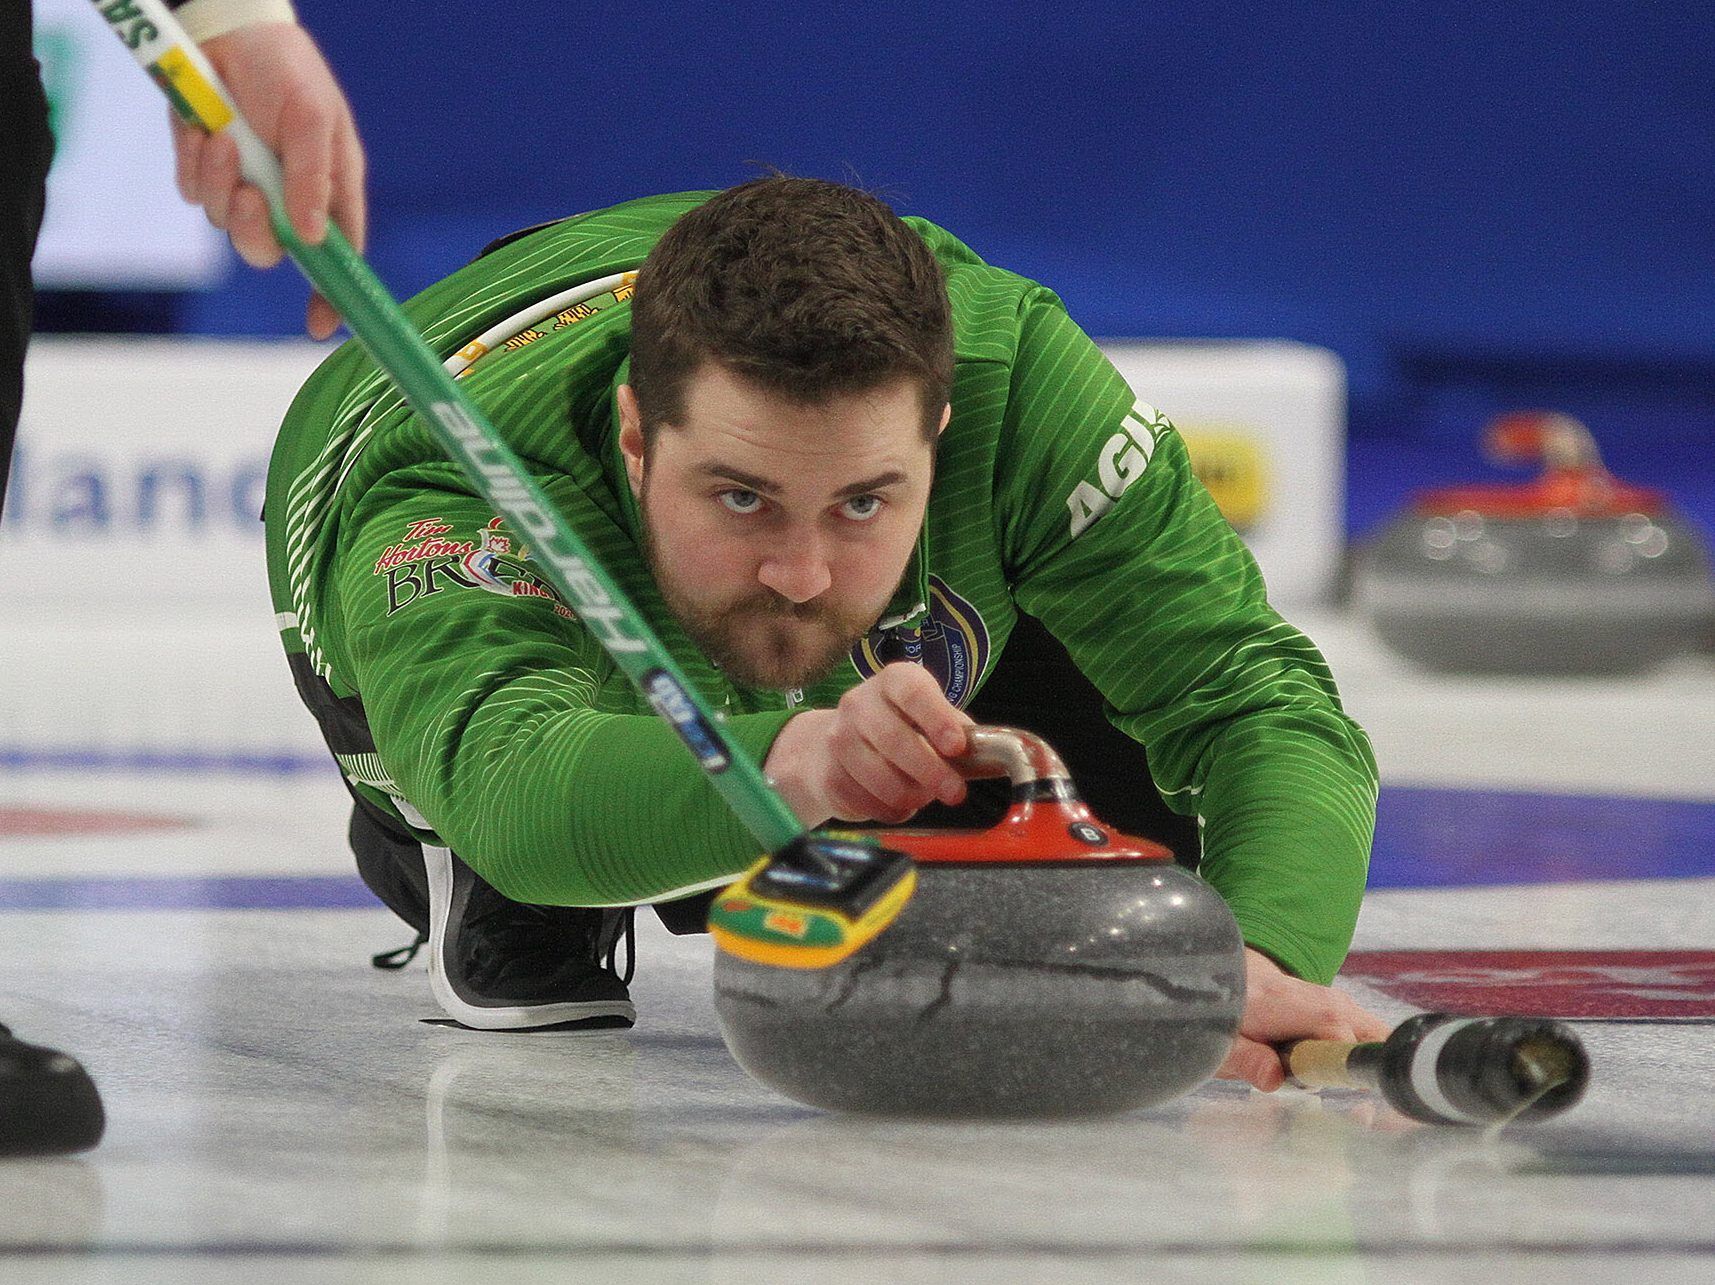 CURLING AT CROSSROADS (PART 1) Top curlers say now is the time to change national championship format Winnipeg Sun